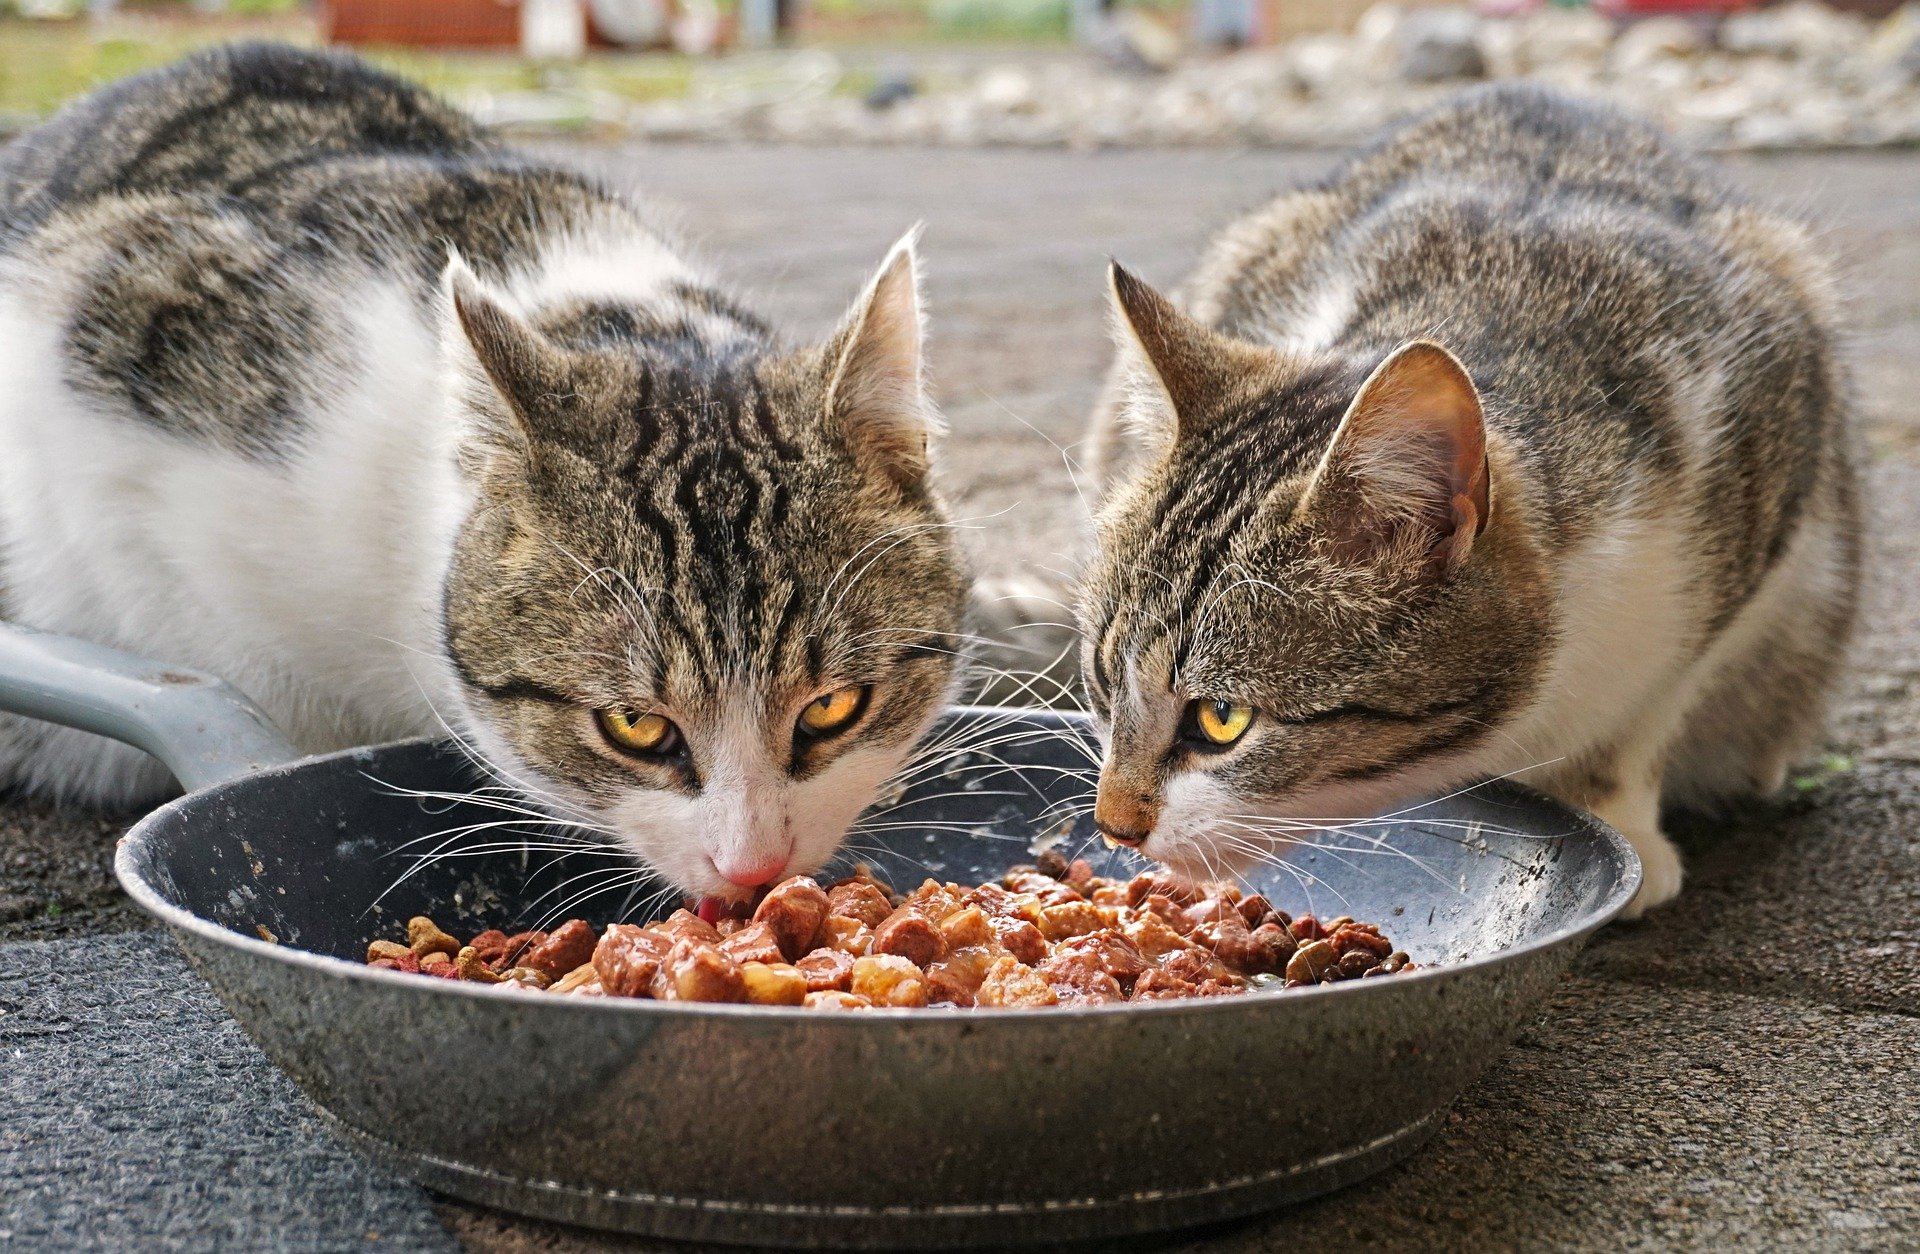 Can cats eat dog food, because it